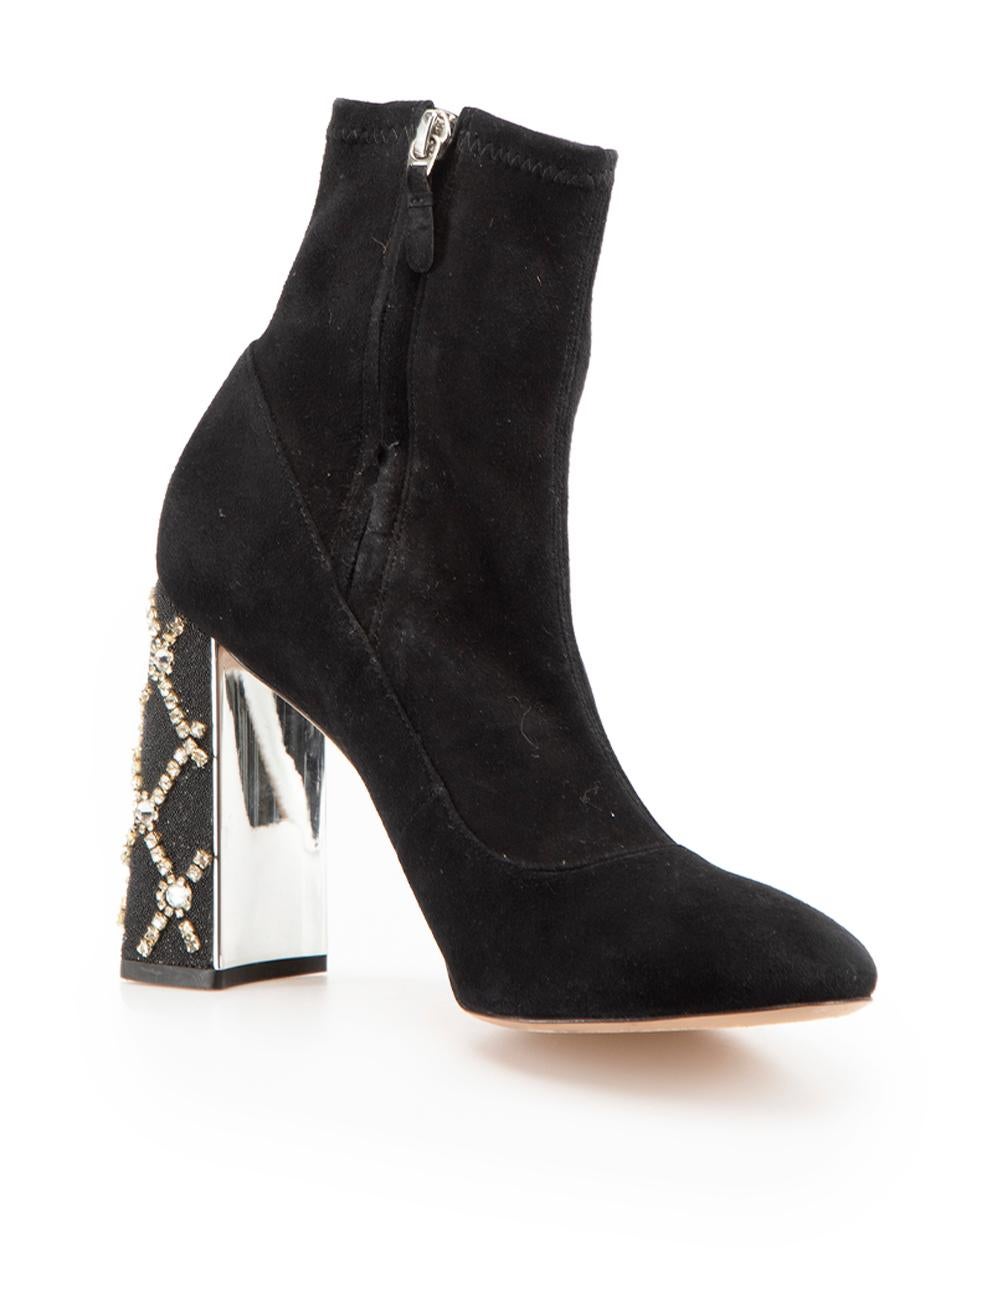 CONDITION is Good. Minor wear to boots is evident. Light wear to both heel embellishment with missing crystals on this used Sophia Webster designer resale item.



Details


Black

Suede

Heeled boots

Almond toe

Jewelled heel stems

Square block